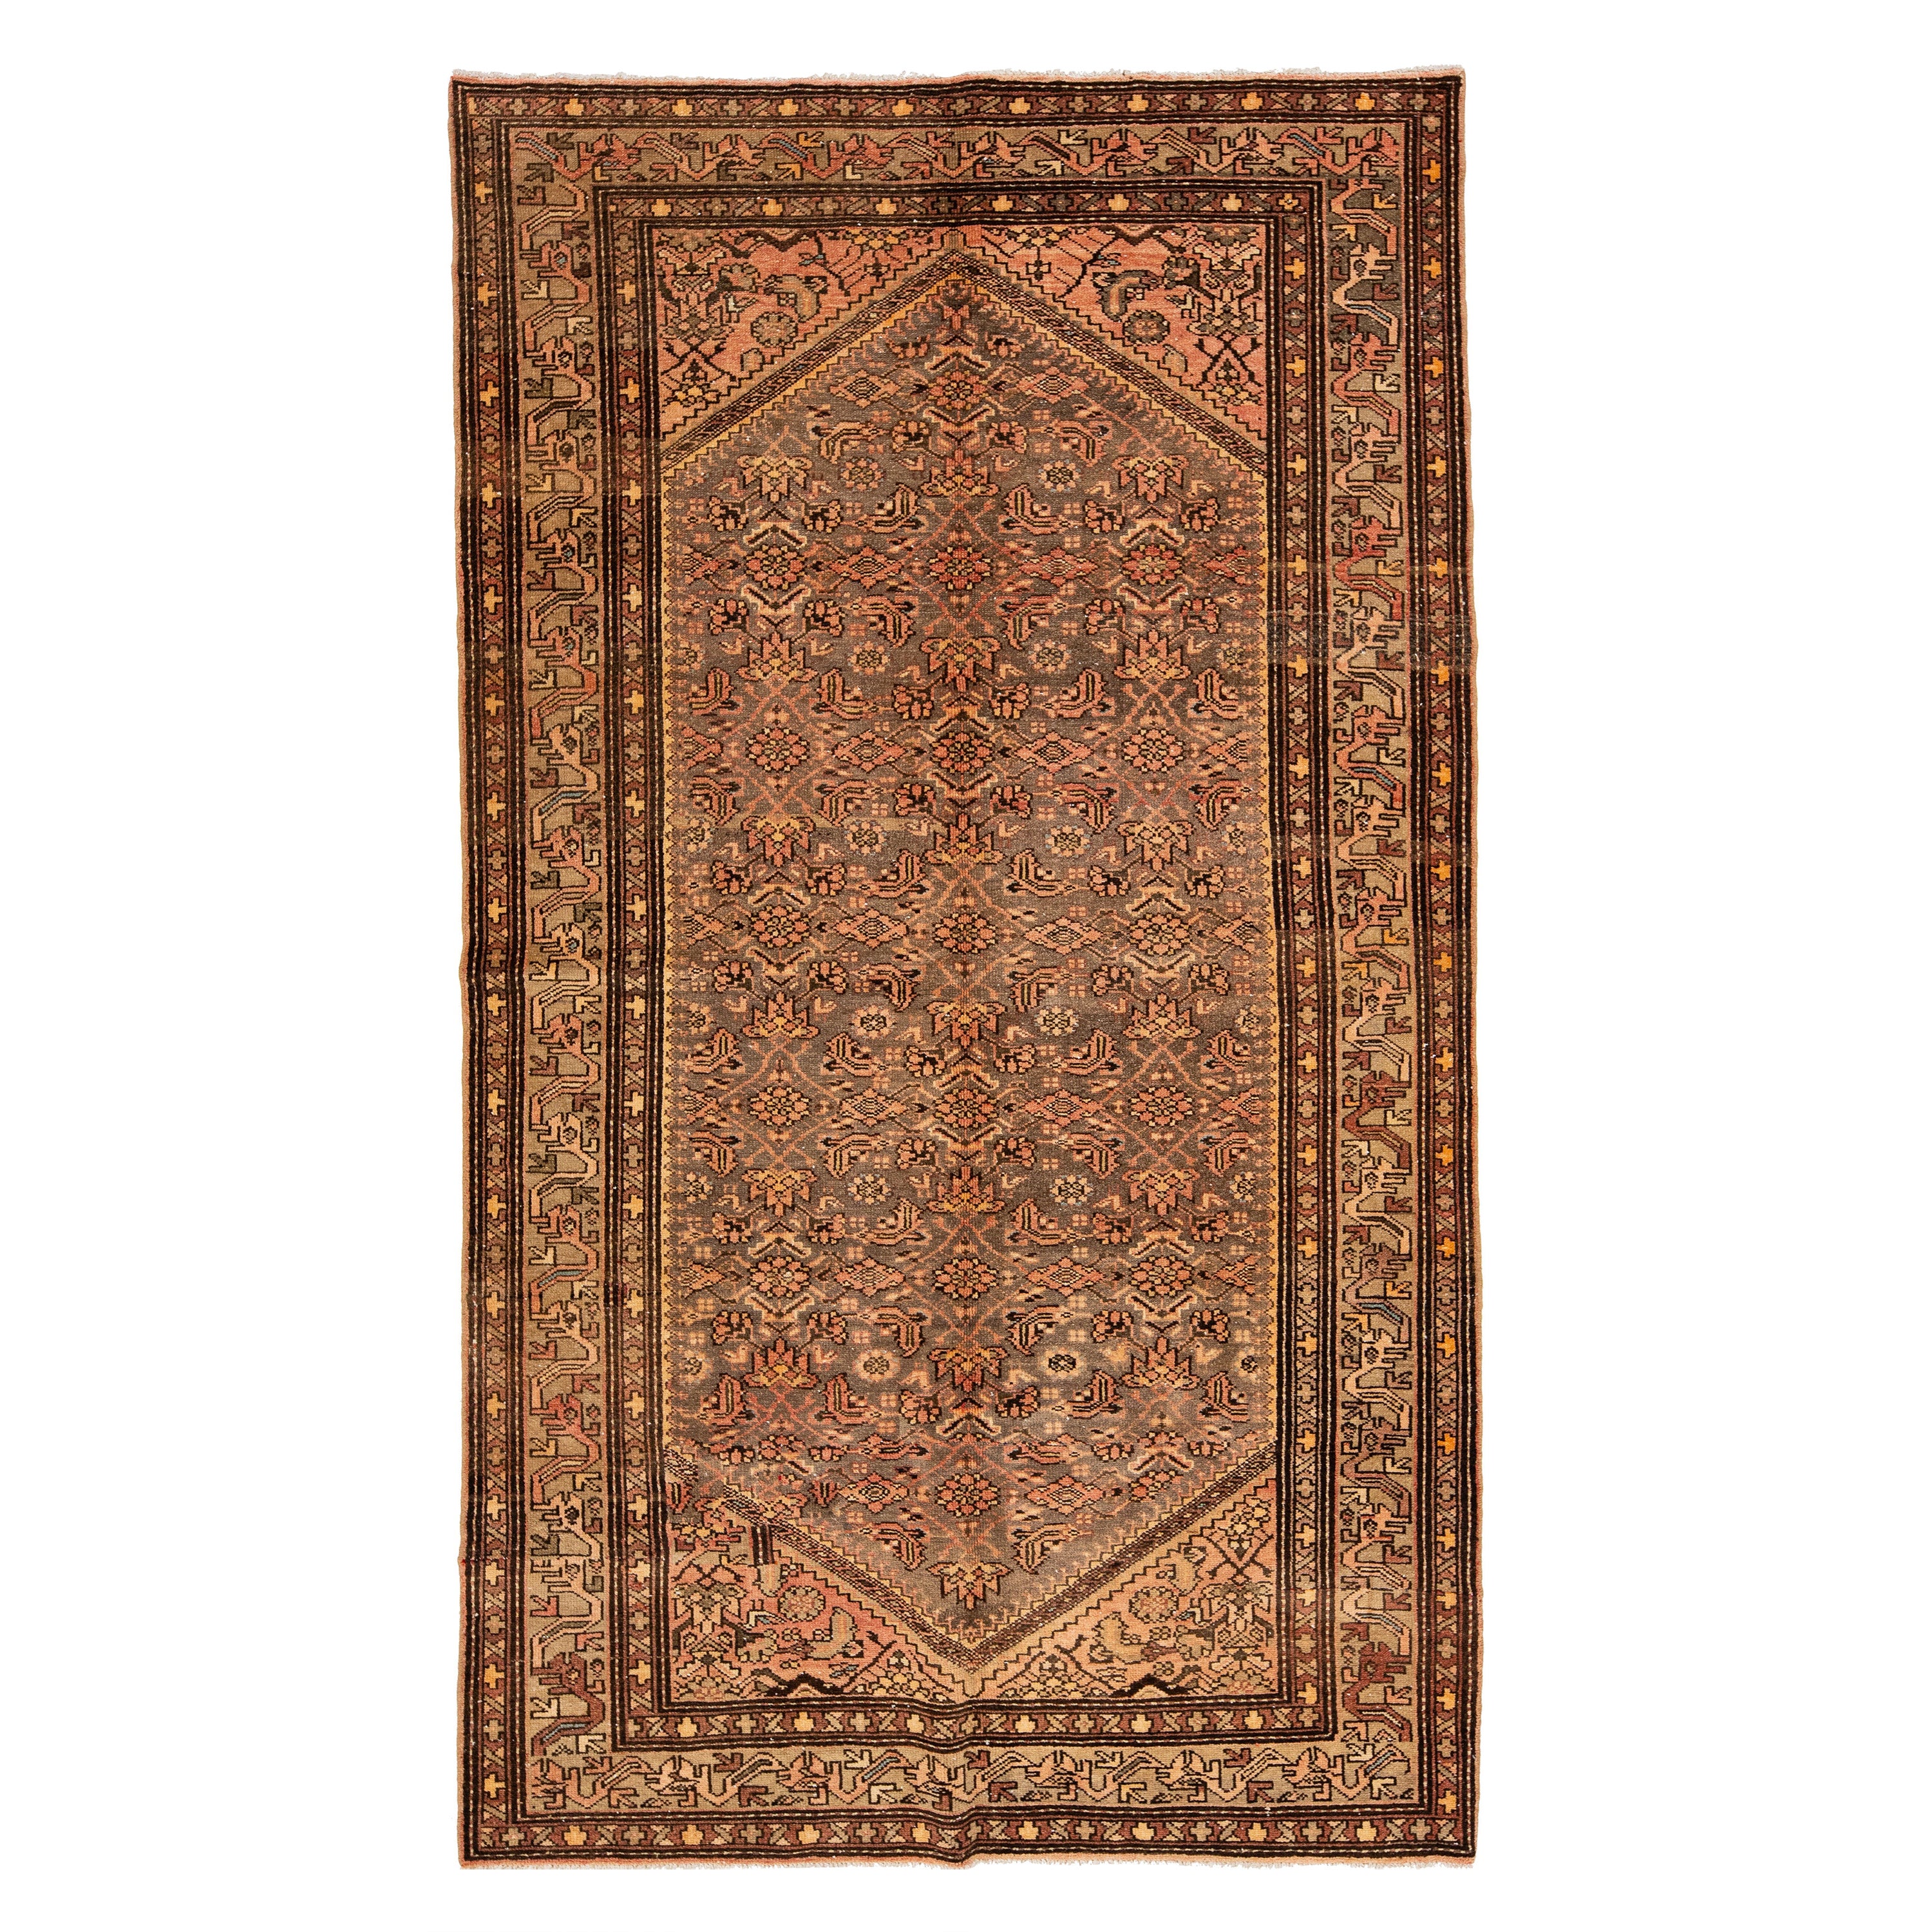 Antique Persian Malayer Gray Wool Rug From the 1920s with Floral Pattern